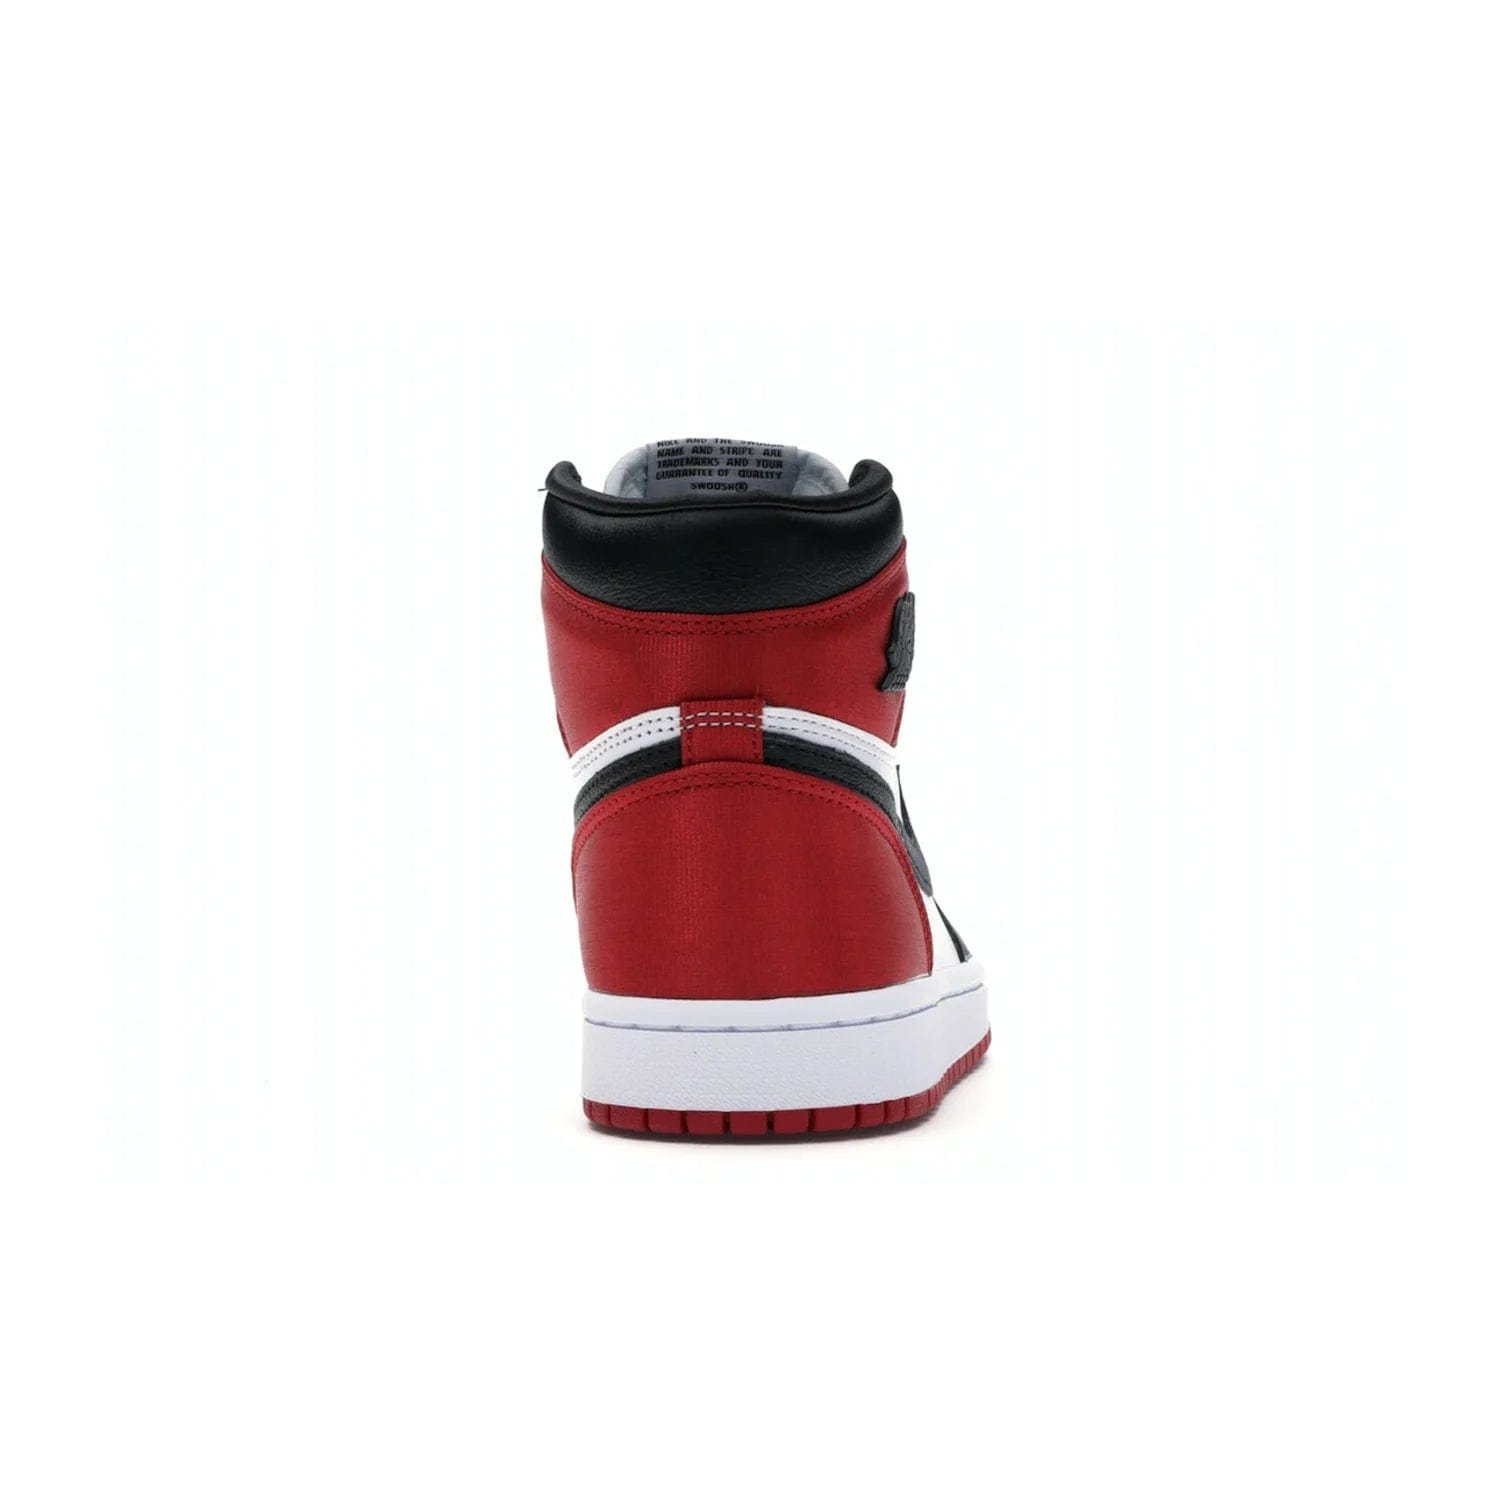 Jordan 1 Retro High Satin Black Toe (Women's) - Image 28 - Only at www.BallersClubKickz.com - Luxurious take on the timeless Air Jordan 1. Features a mix of black leather and satin materials with subtle University Red accents. Elevated look with metal Wings logo on the heel. Released in August 2019.